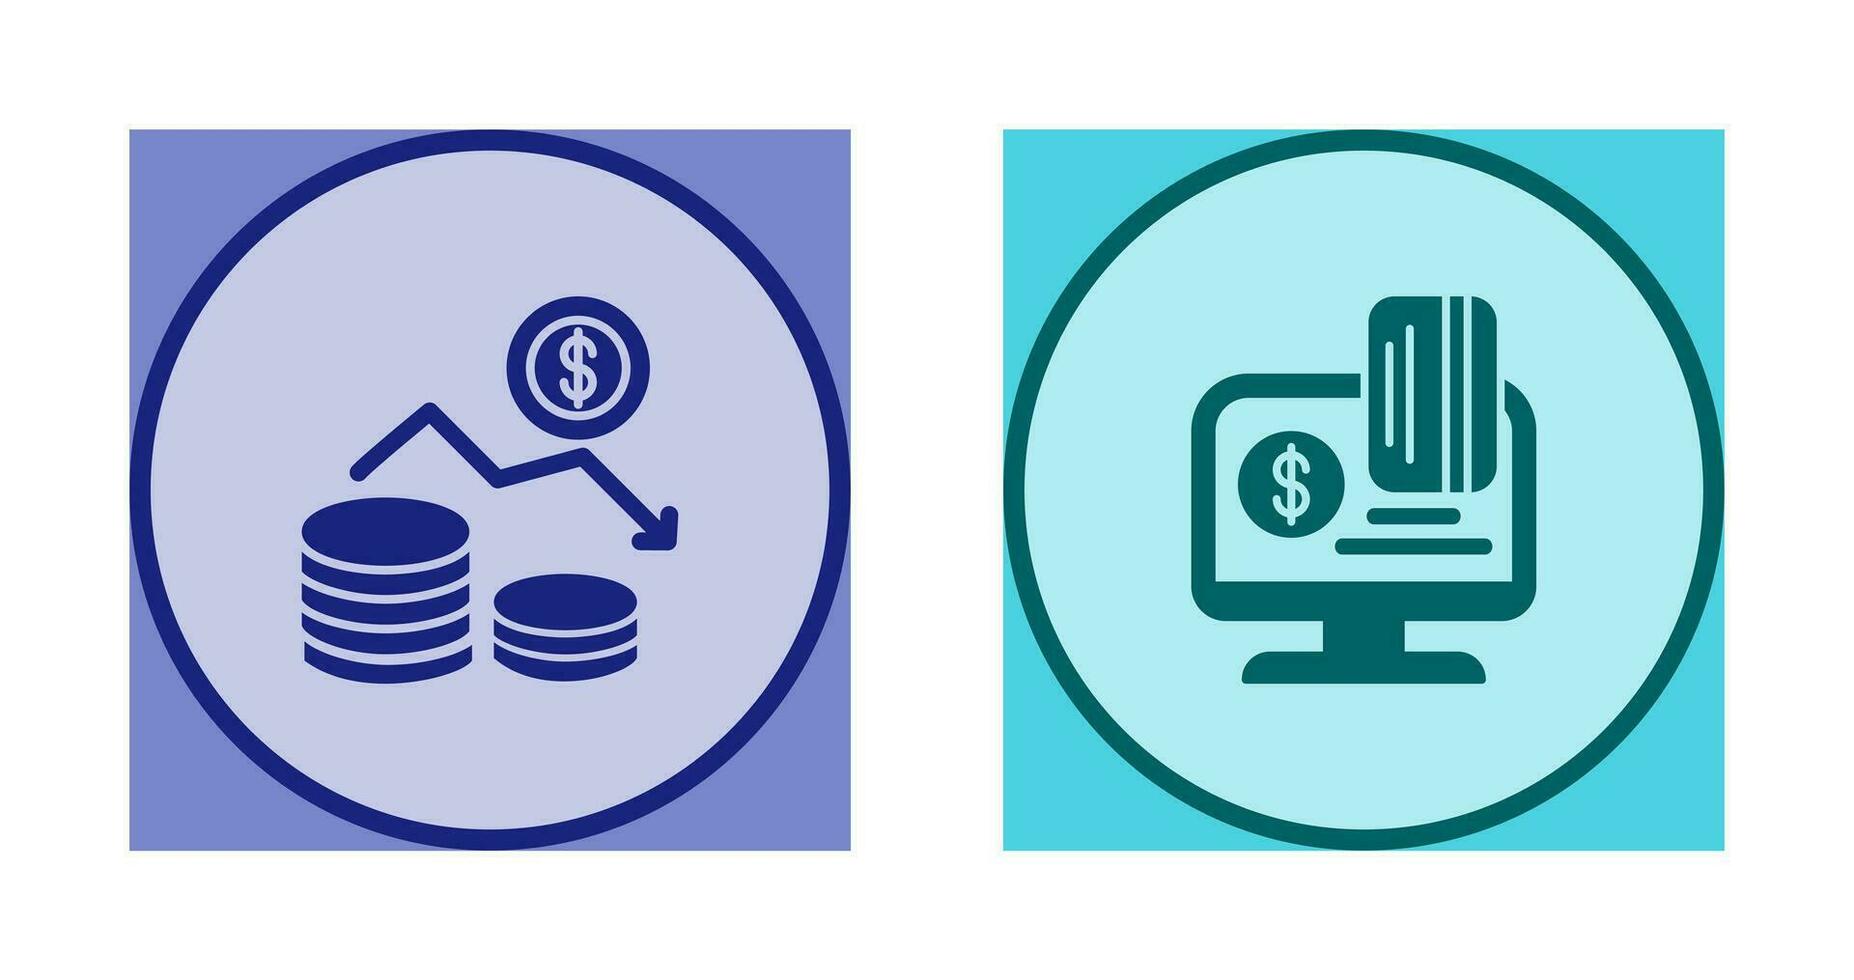 Money Loss and Online Payment Icon vector